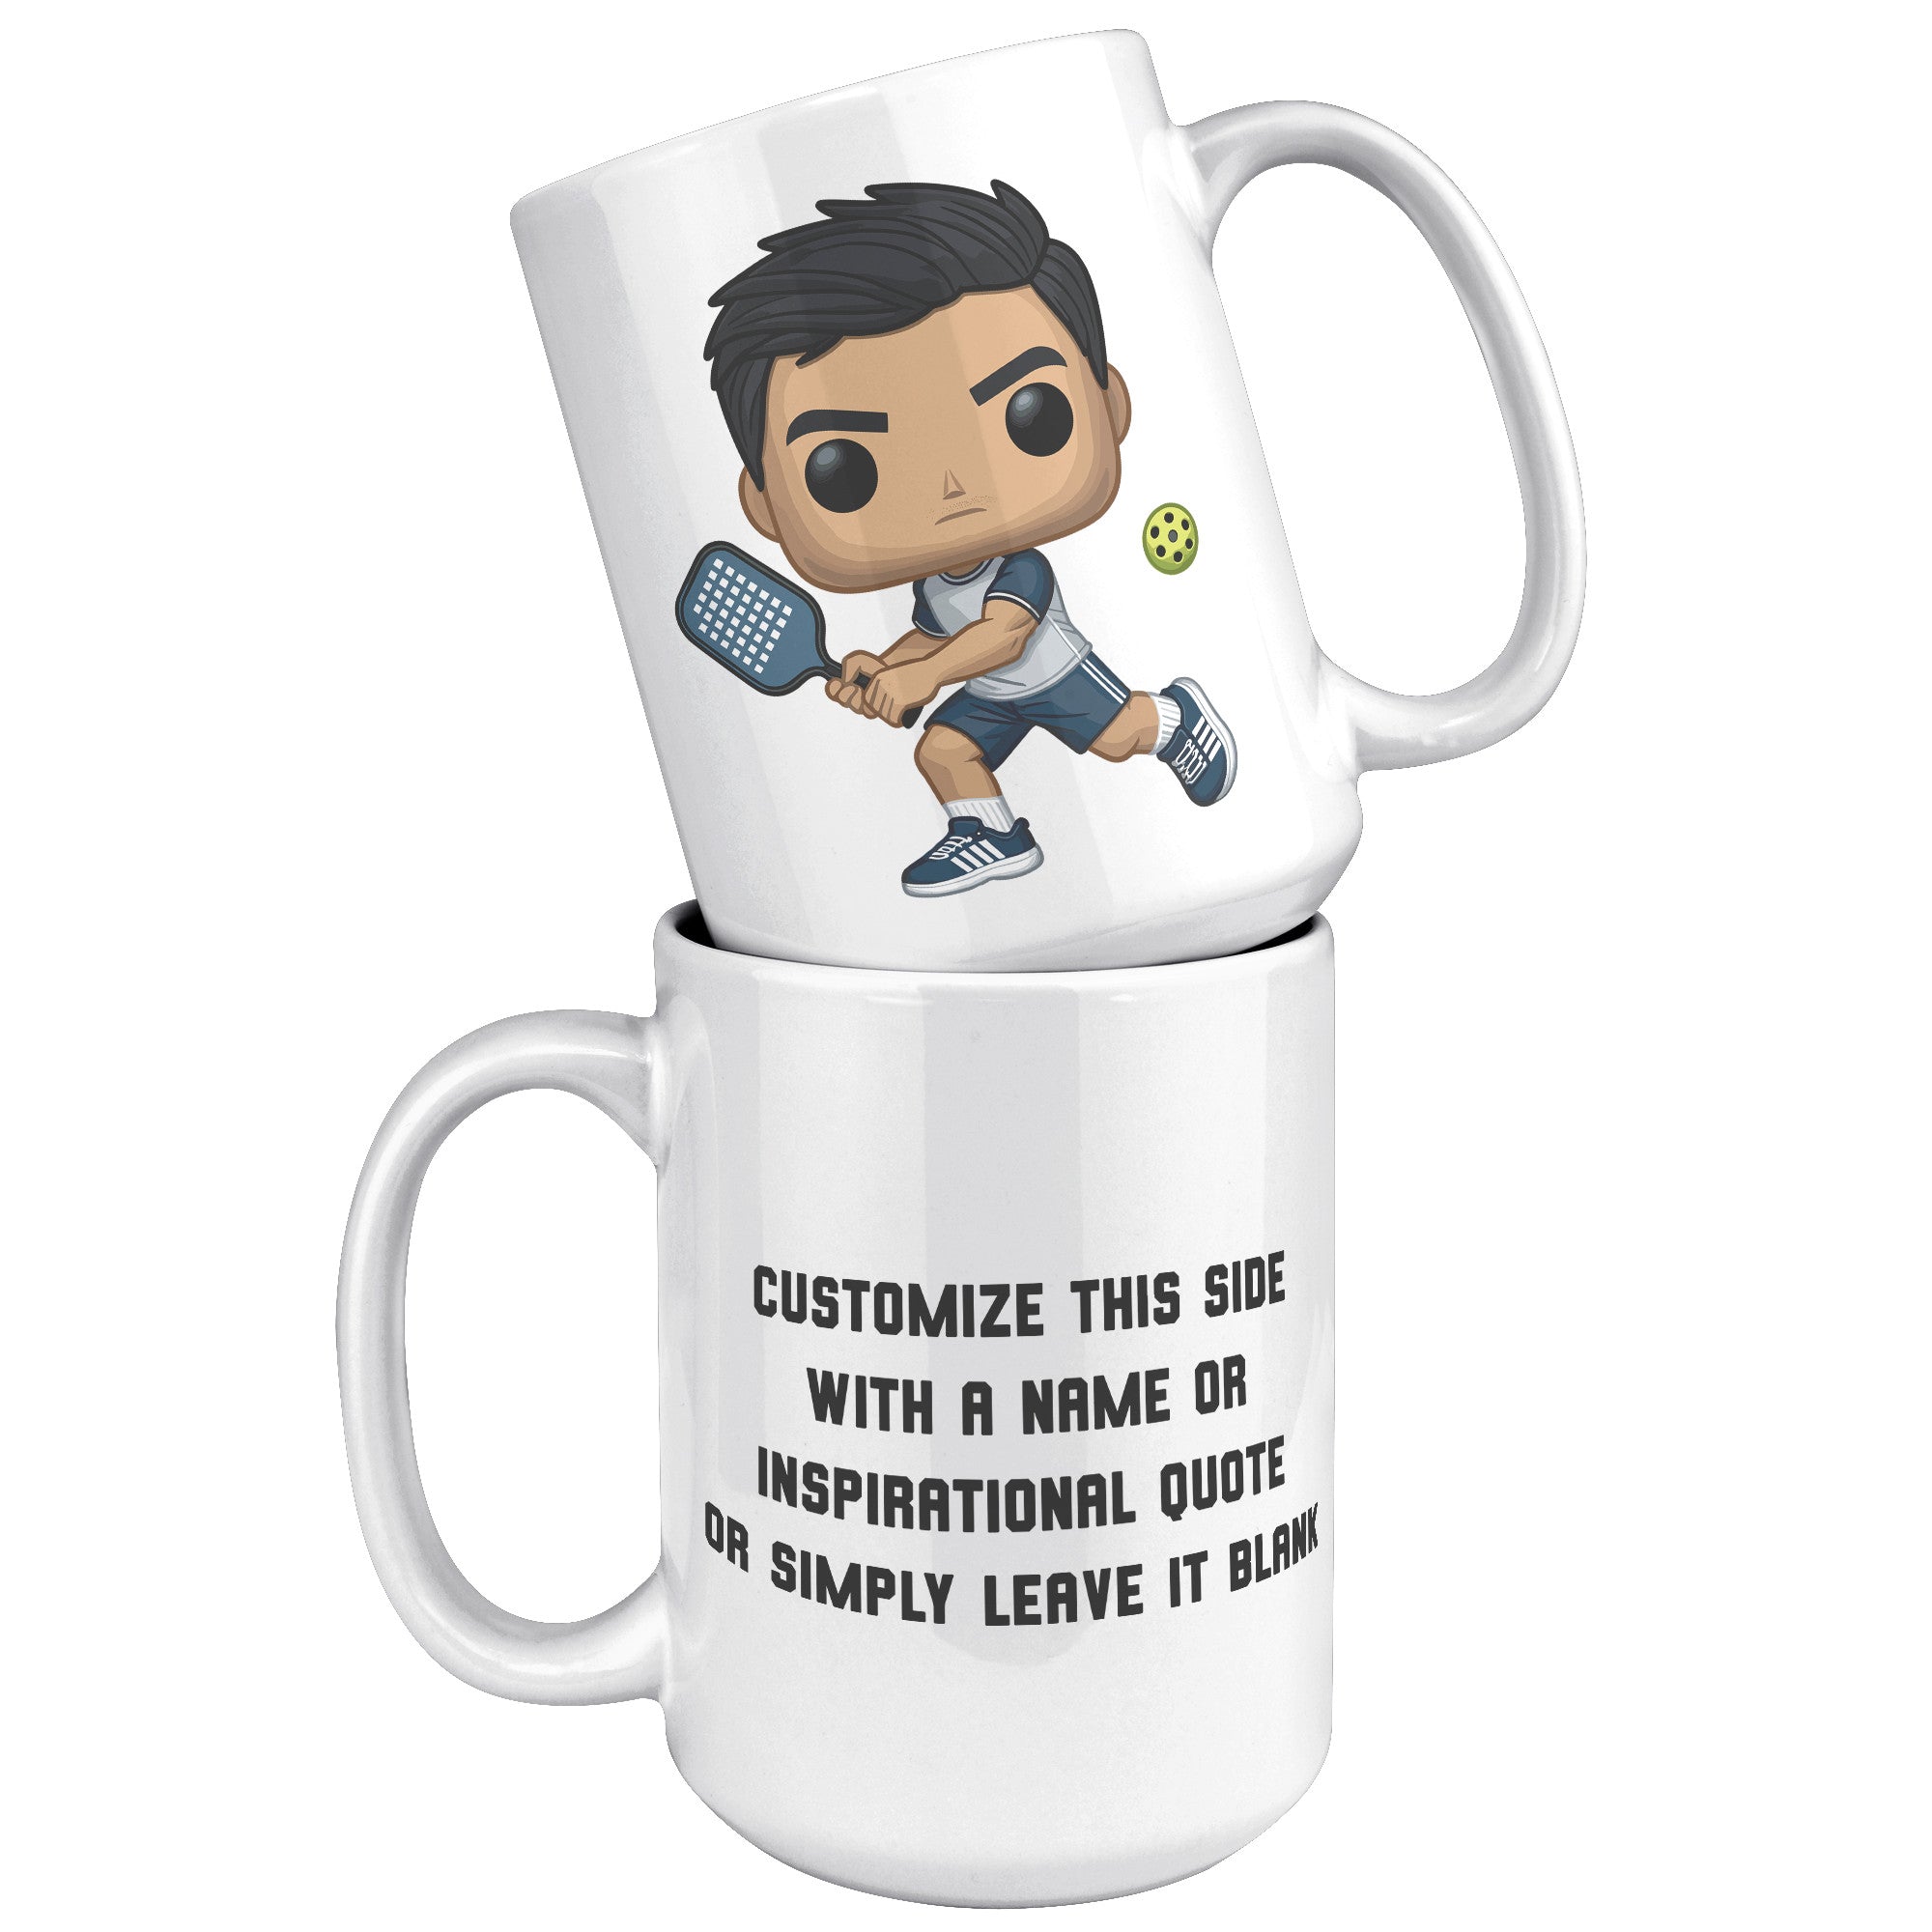 "Funko Pop Style Pickle Ball Player Boy Coffee Mug - Cute Athletic Cup - Perfect Gift for Pickle Ball Enthusiasts - Sporty Boy Apparel" - G1